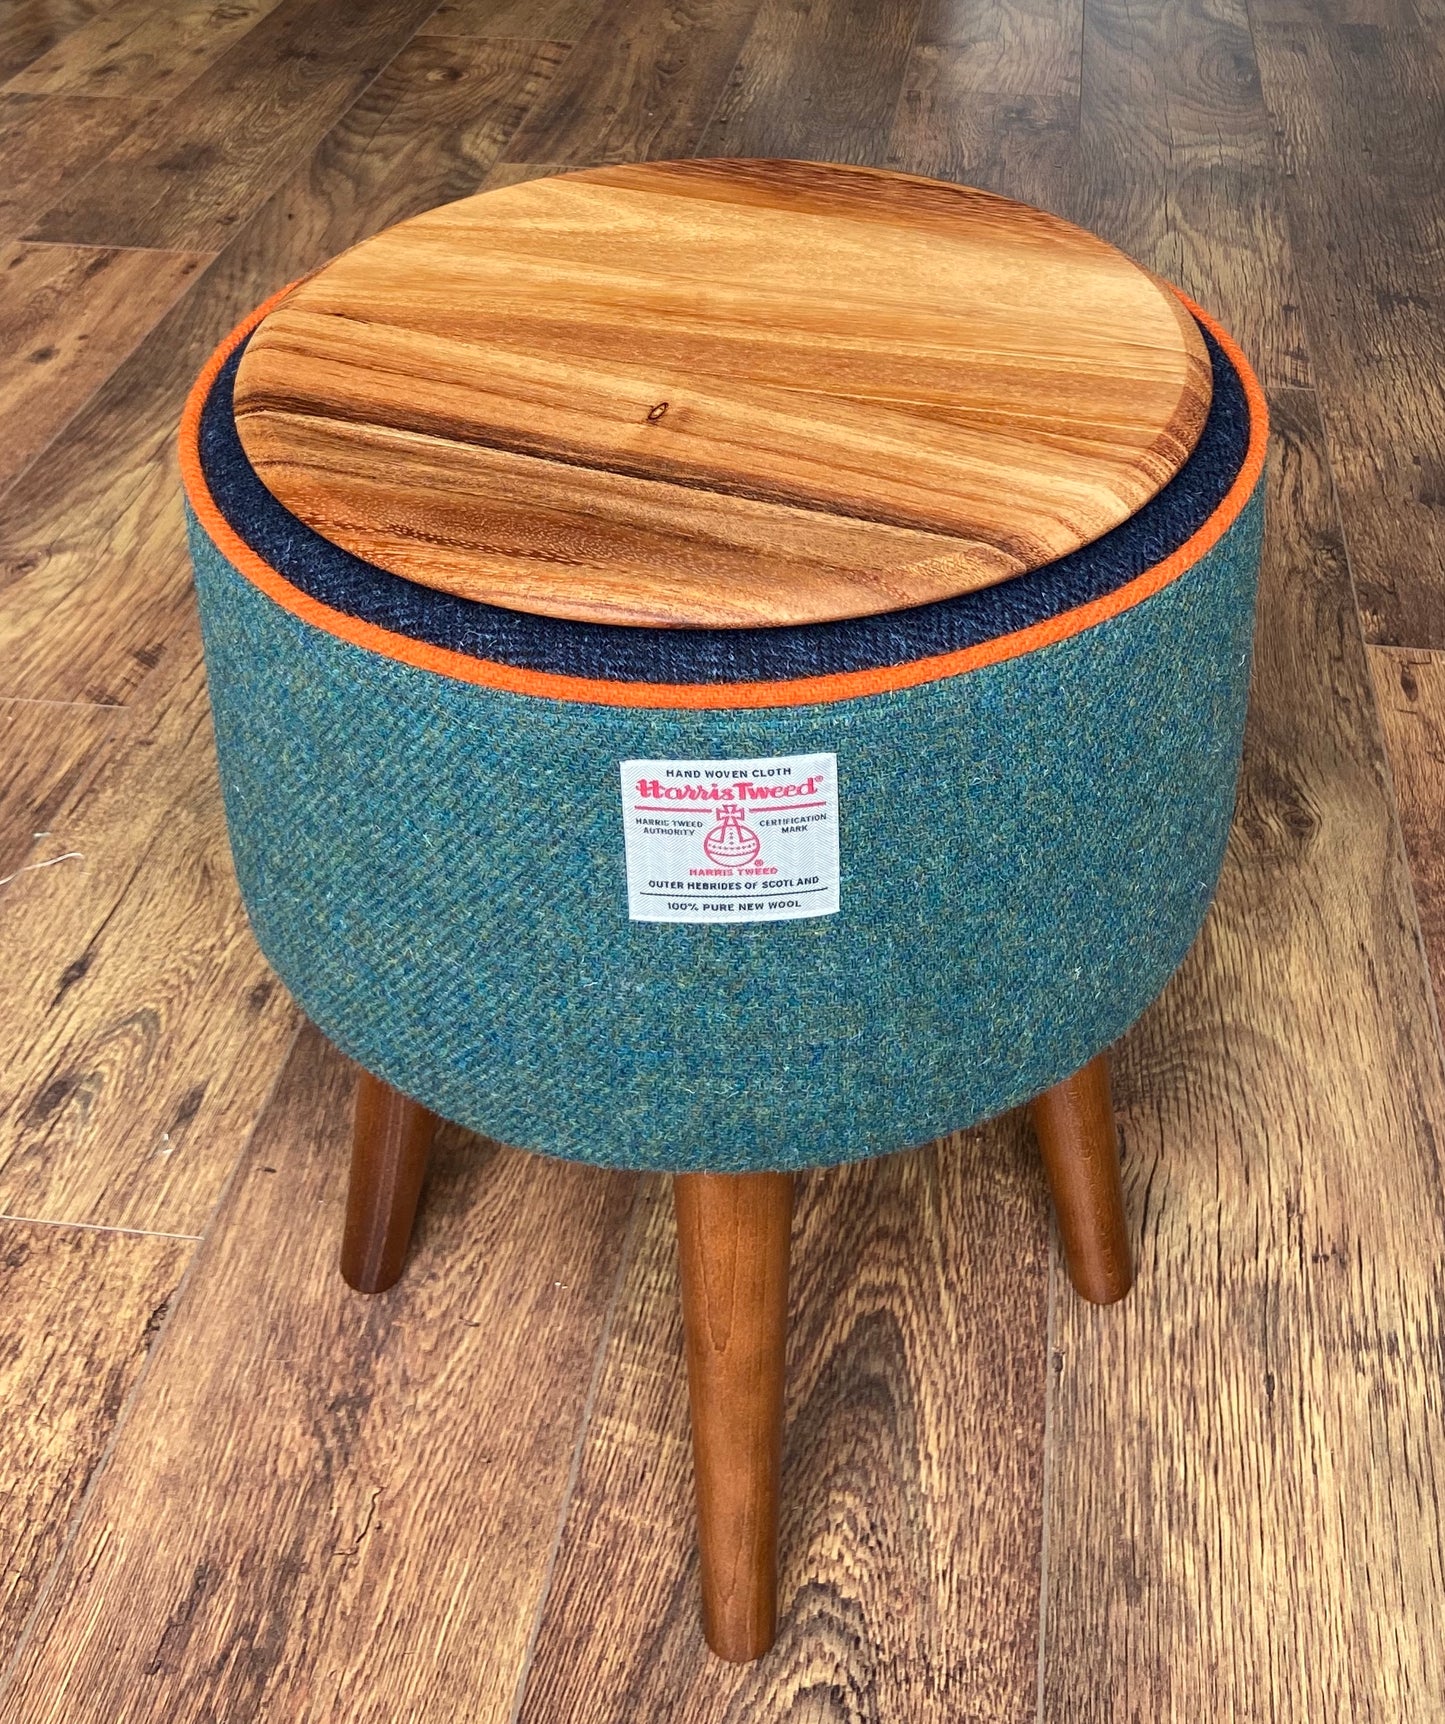 Green and Navy Harris Tweed Table with Orange Piping and Removable Wooden Top